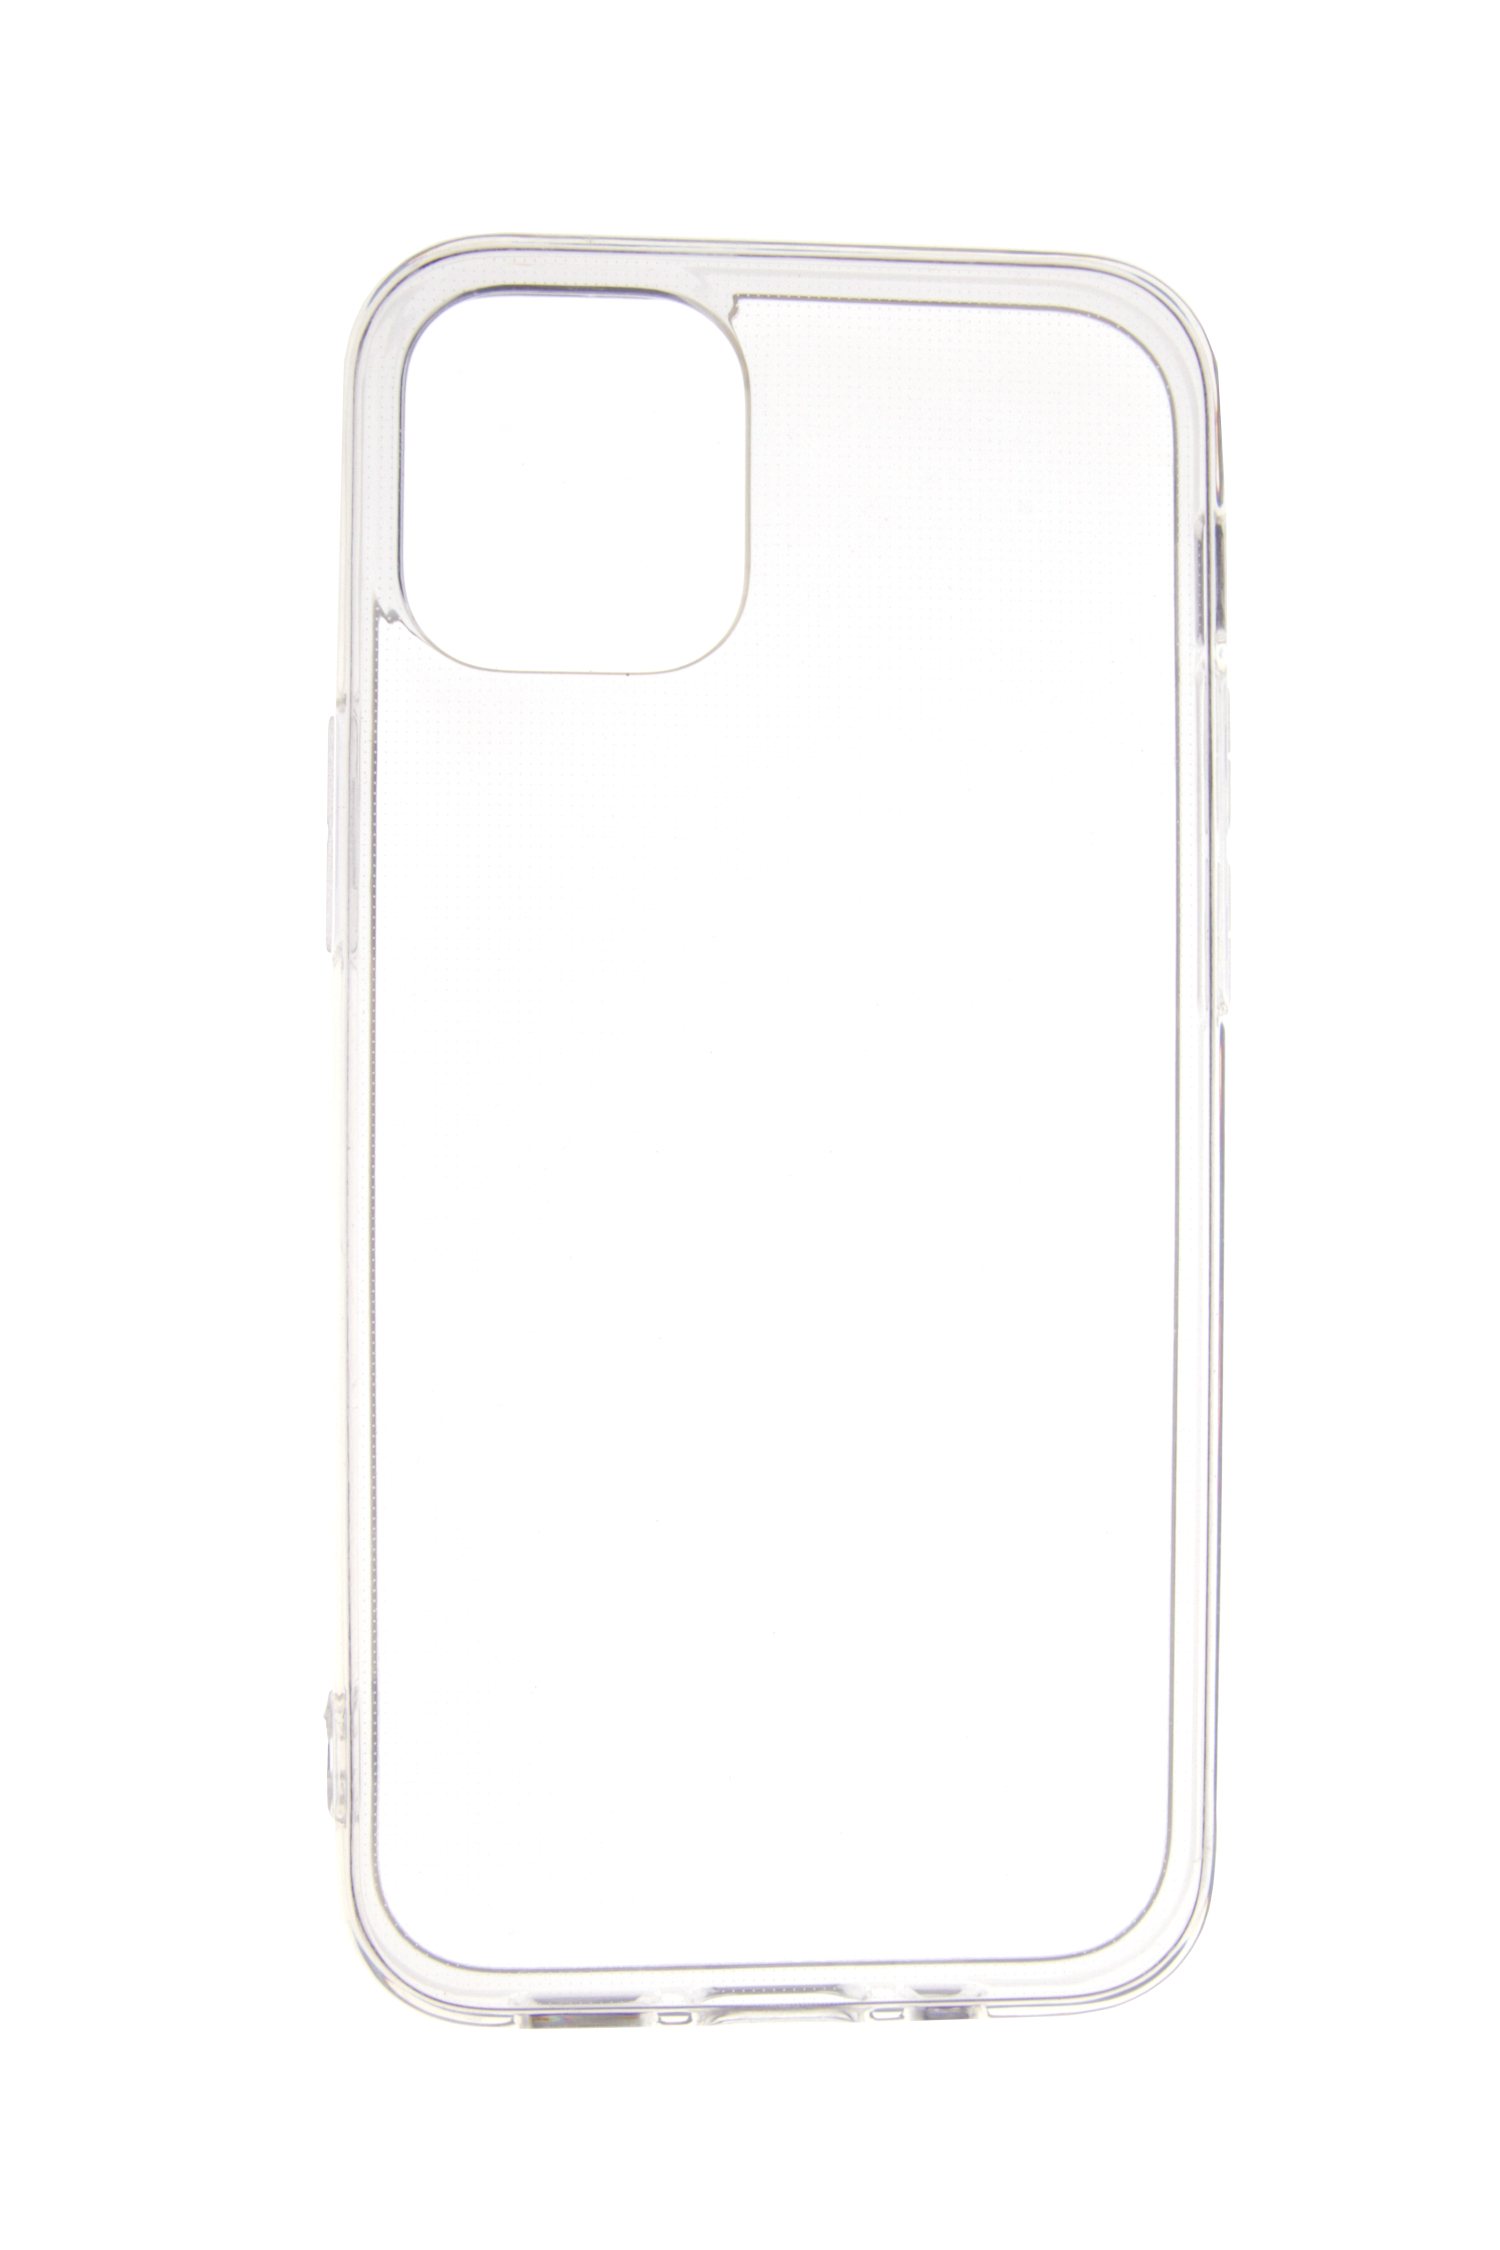 JAMCOVER 2.0 mm TPU Case mini, Transparent 12 iPhone Apple, Strong, Backcover